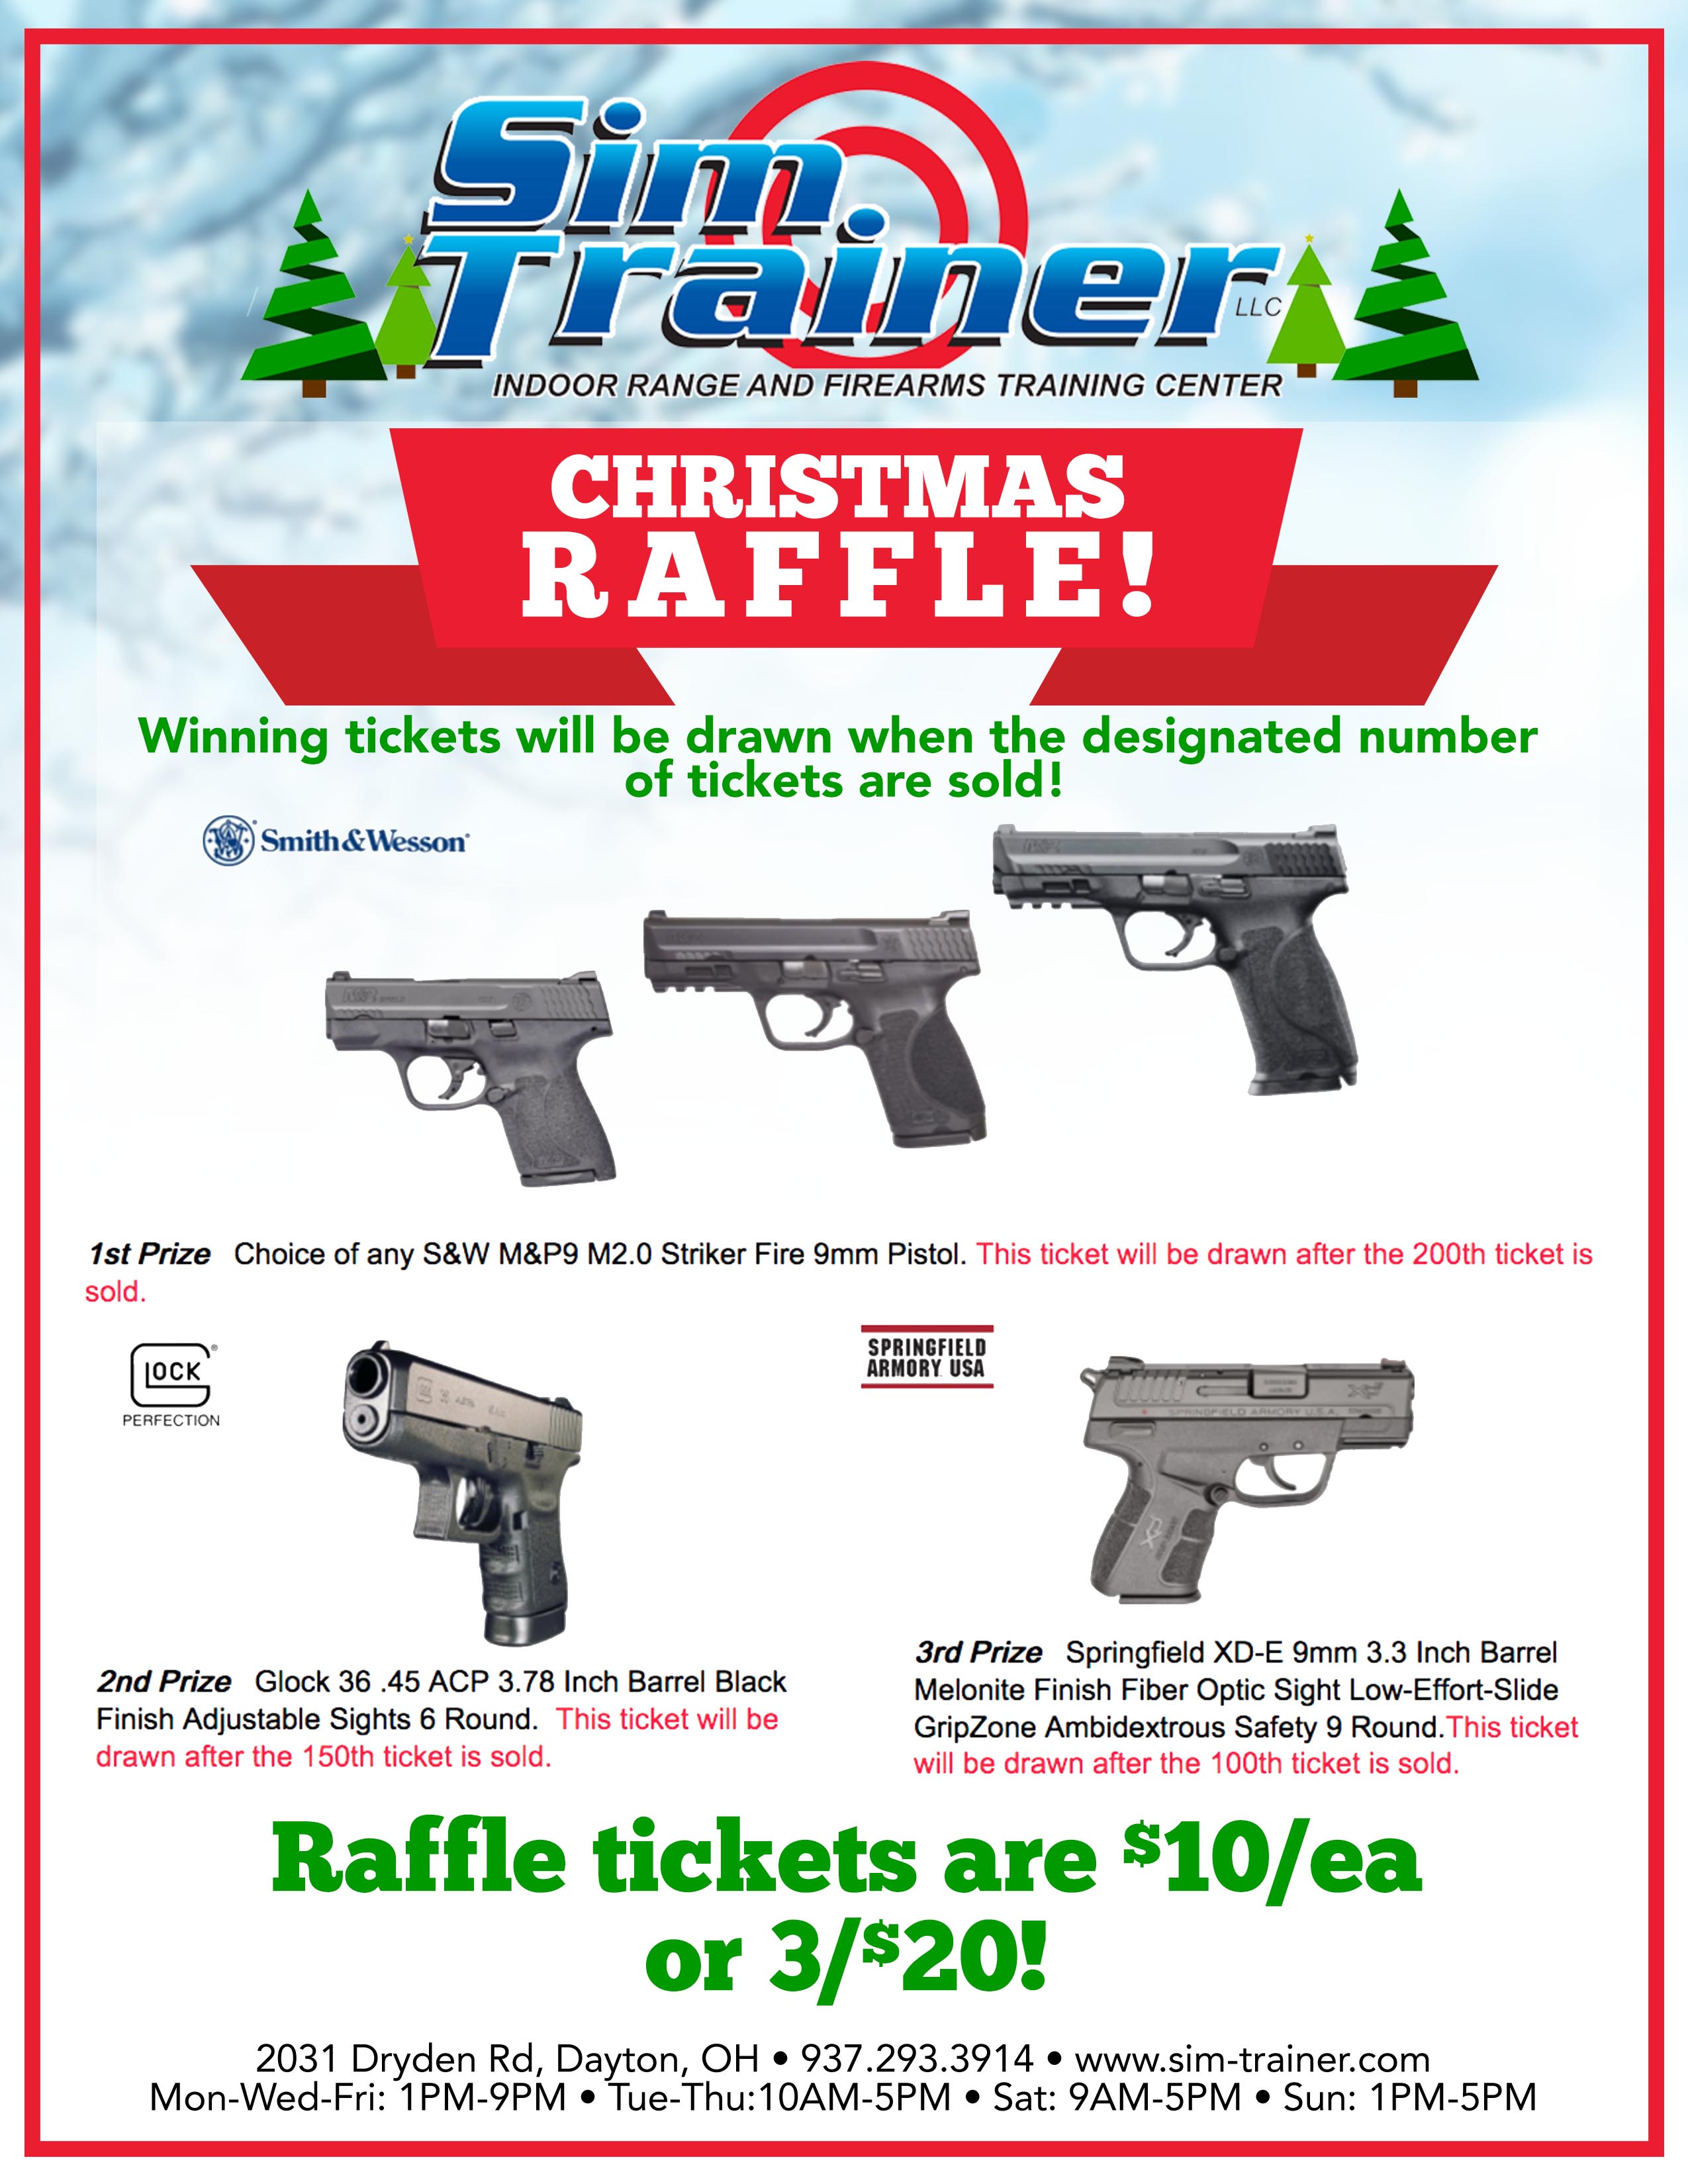 Our Christmas Raffle is STARTING NOW!